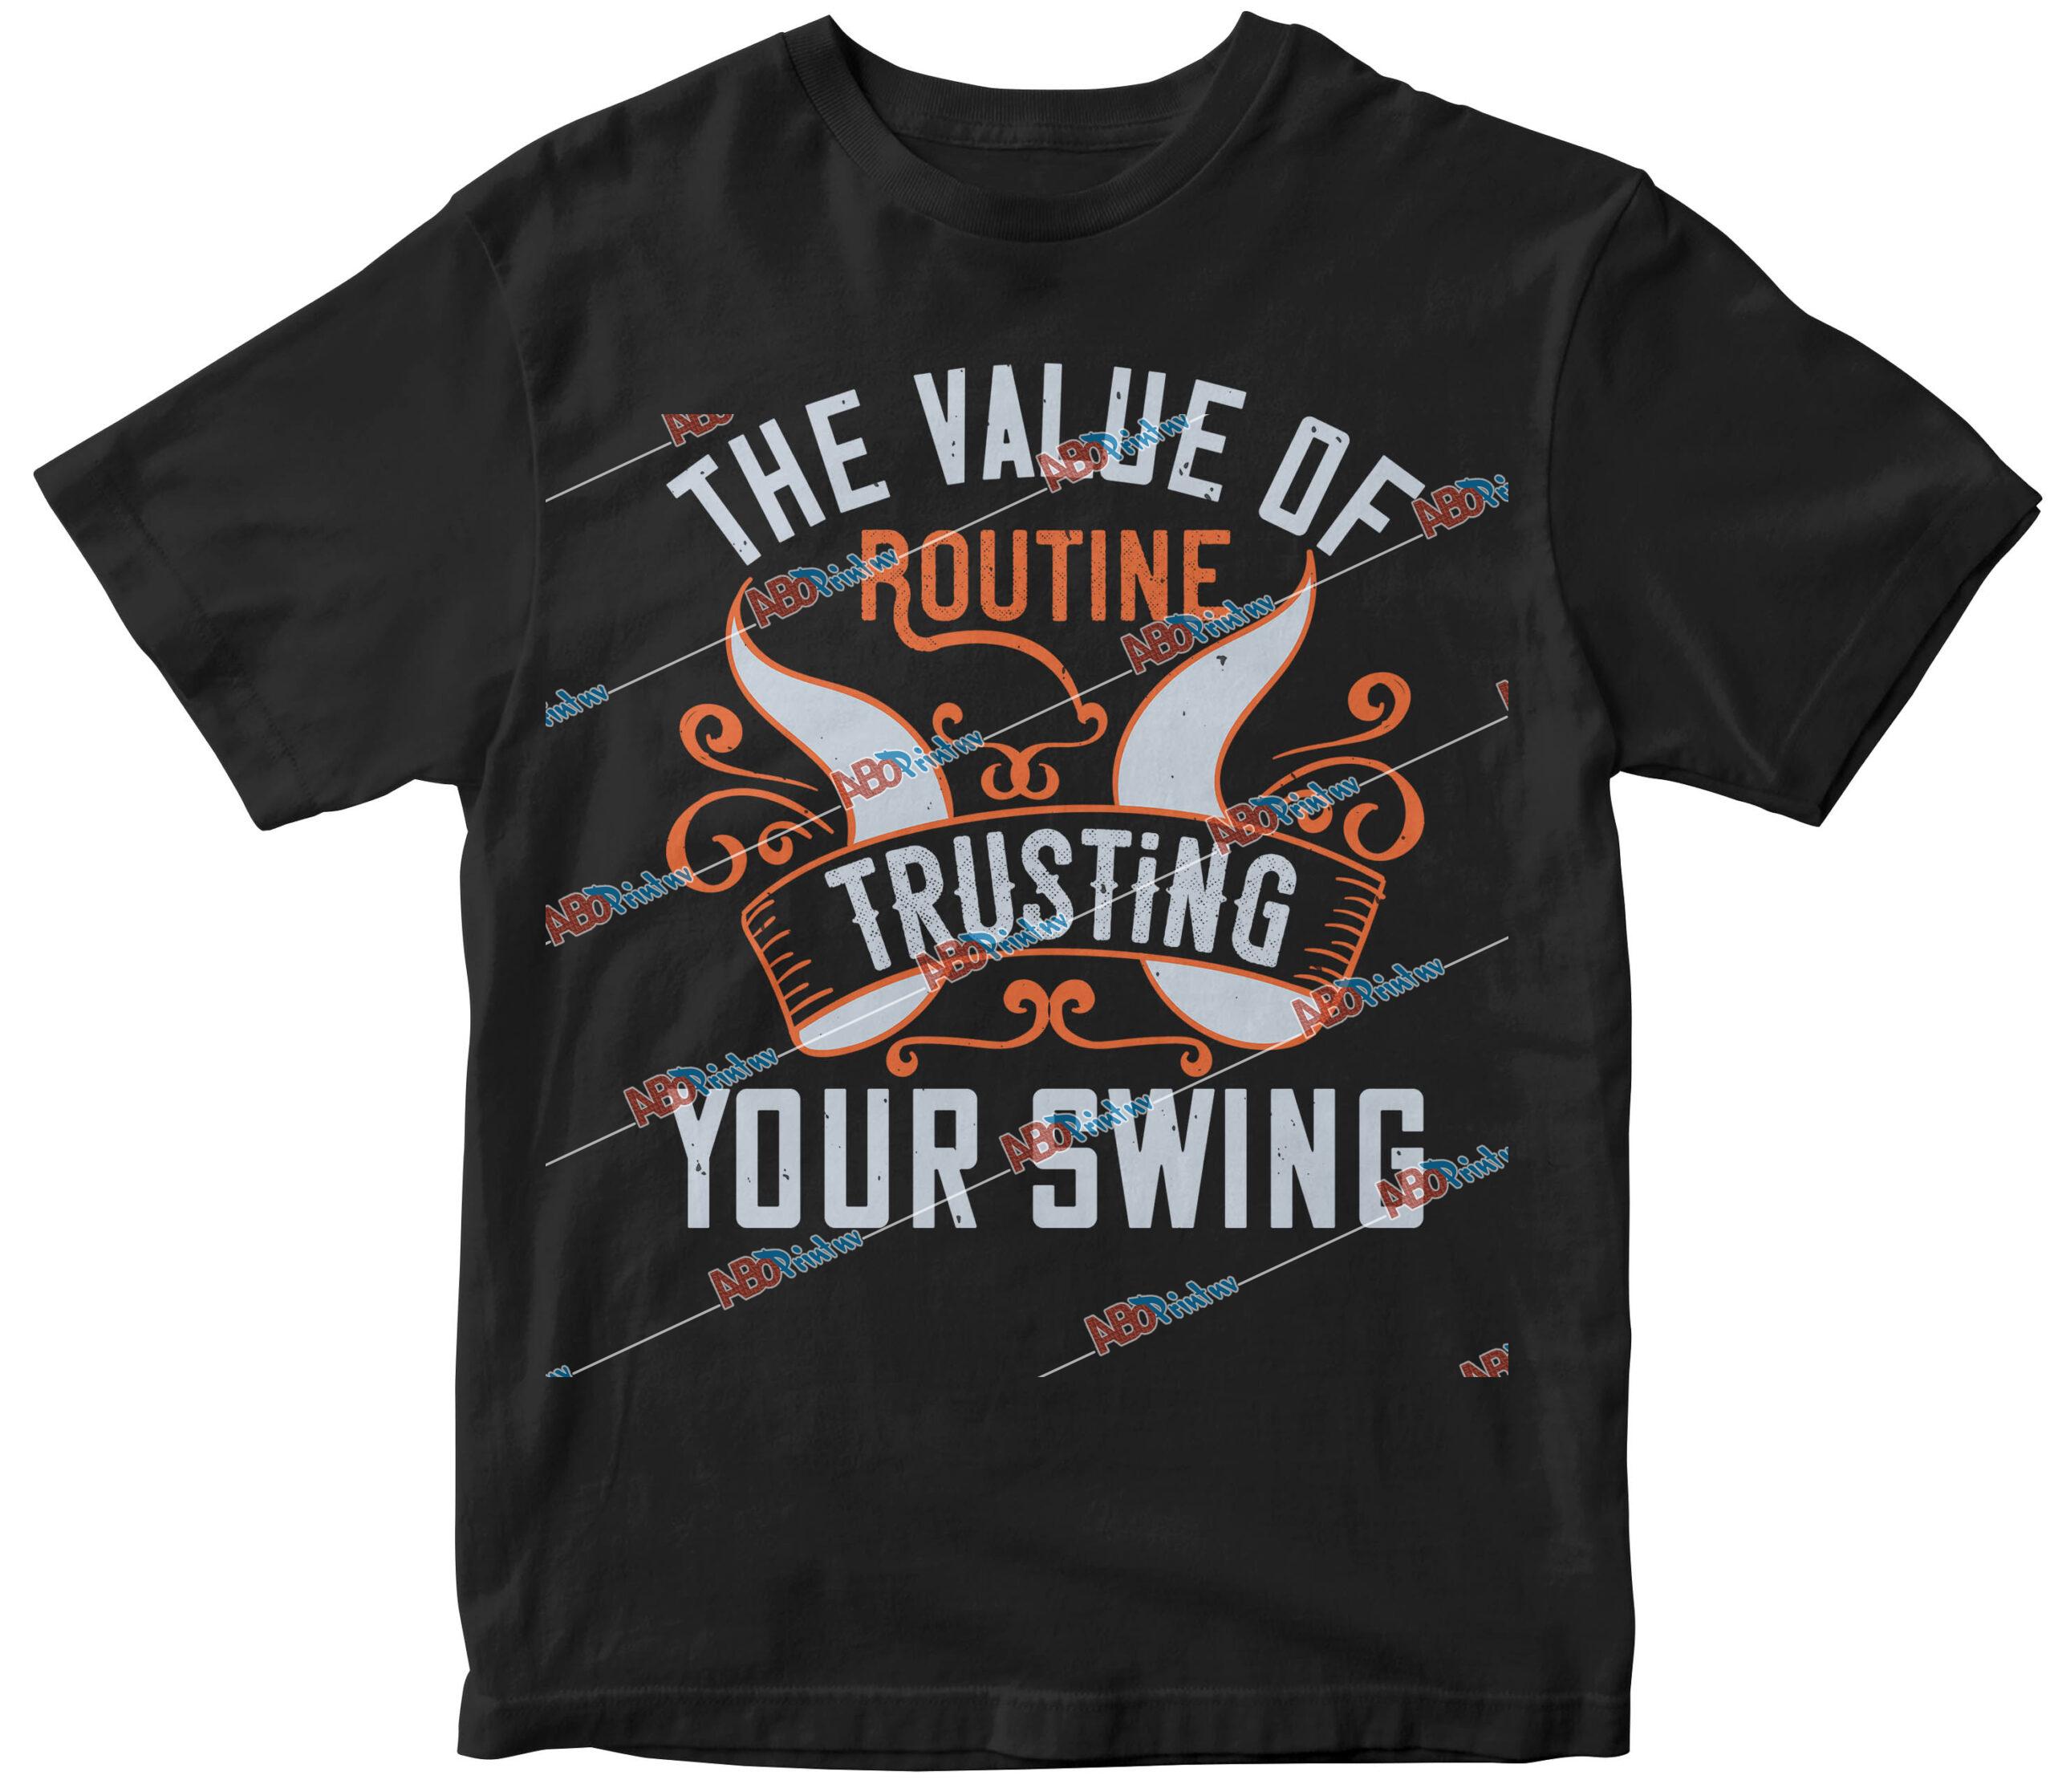 The value of routine trusting your swing.jpg